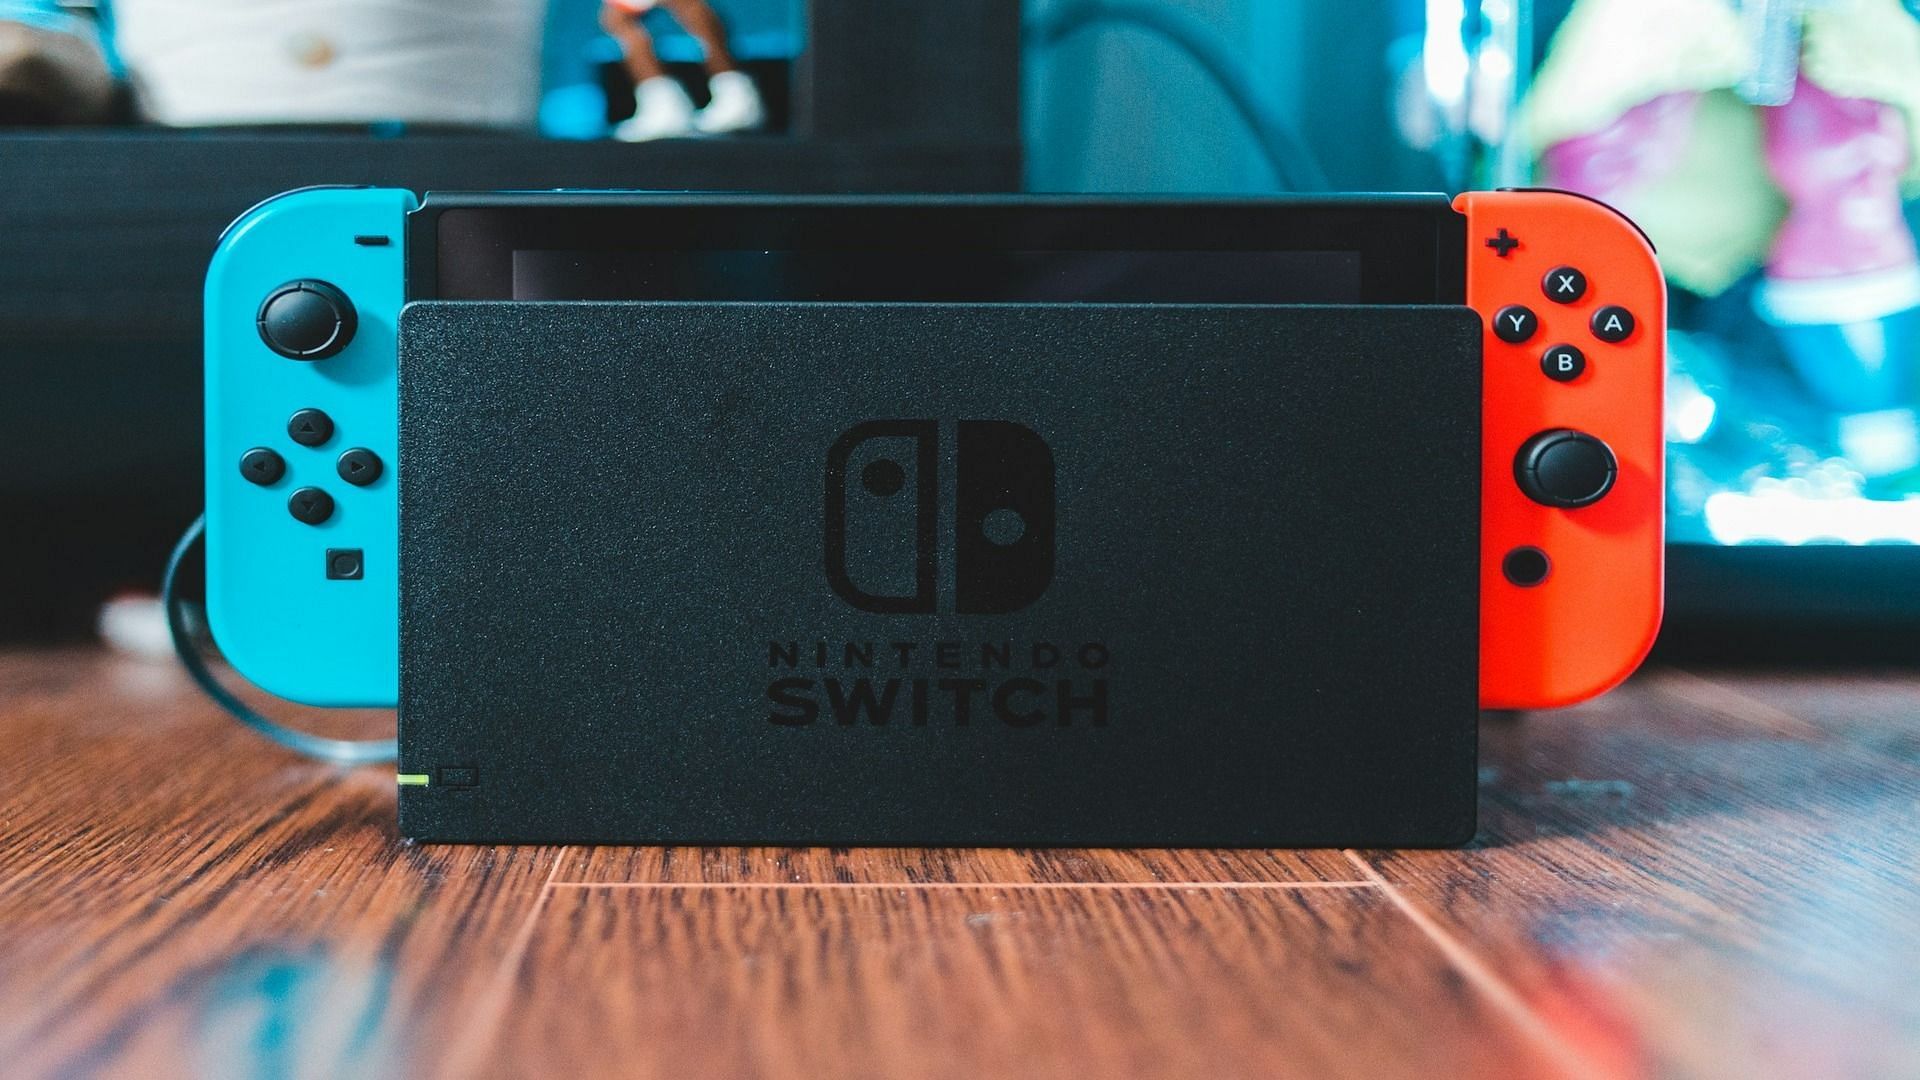 Nintendo Switch is the most popular gaming handheld